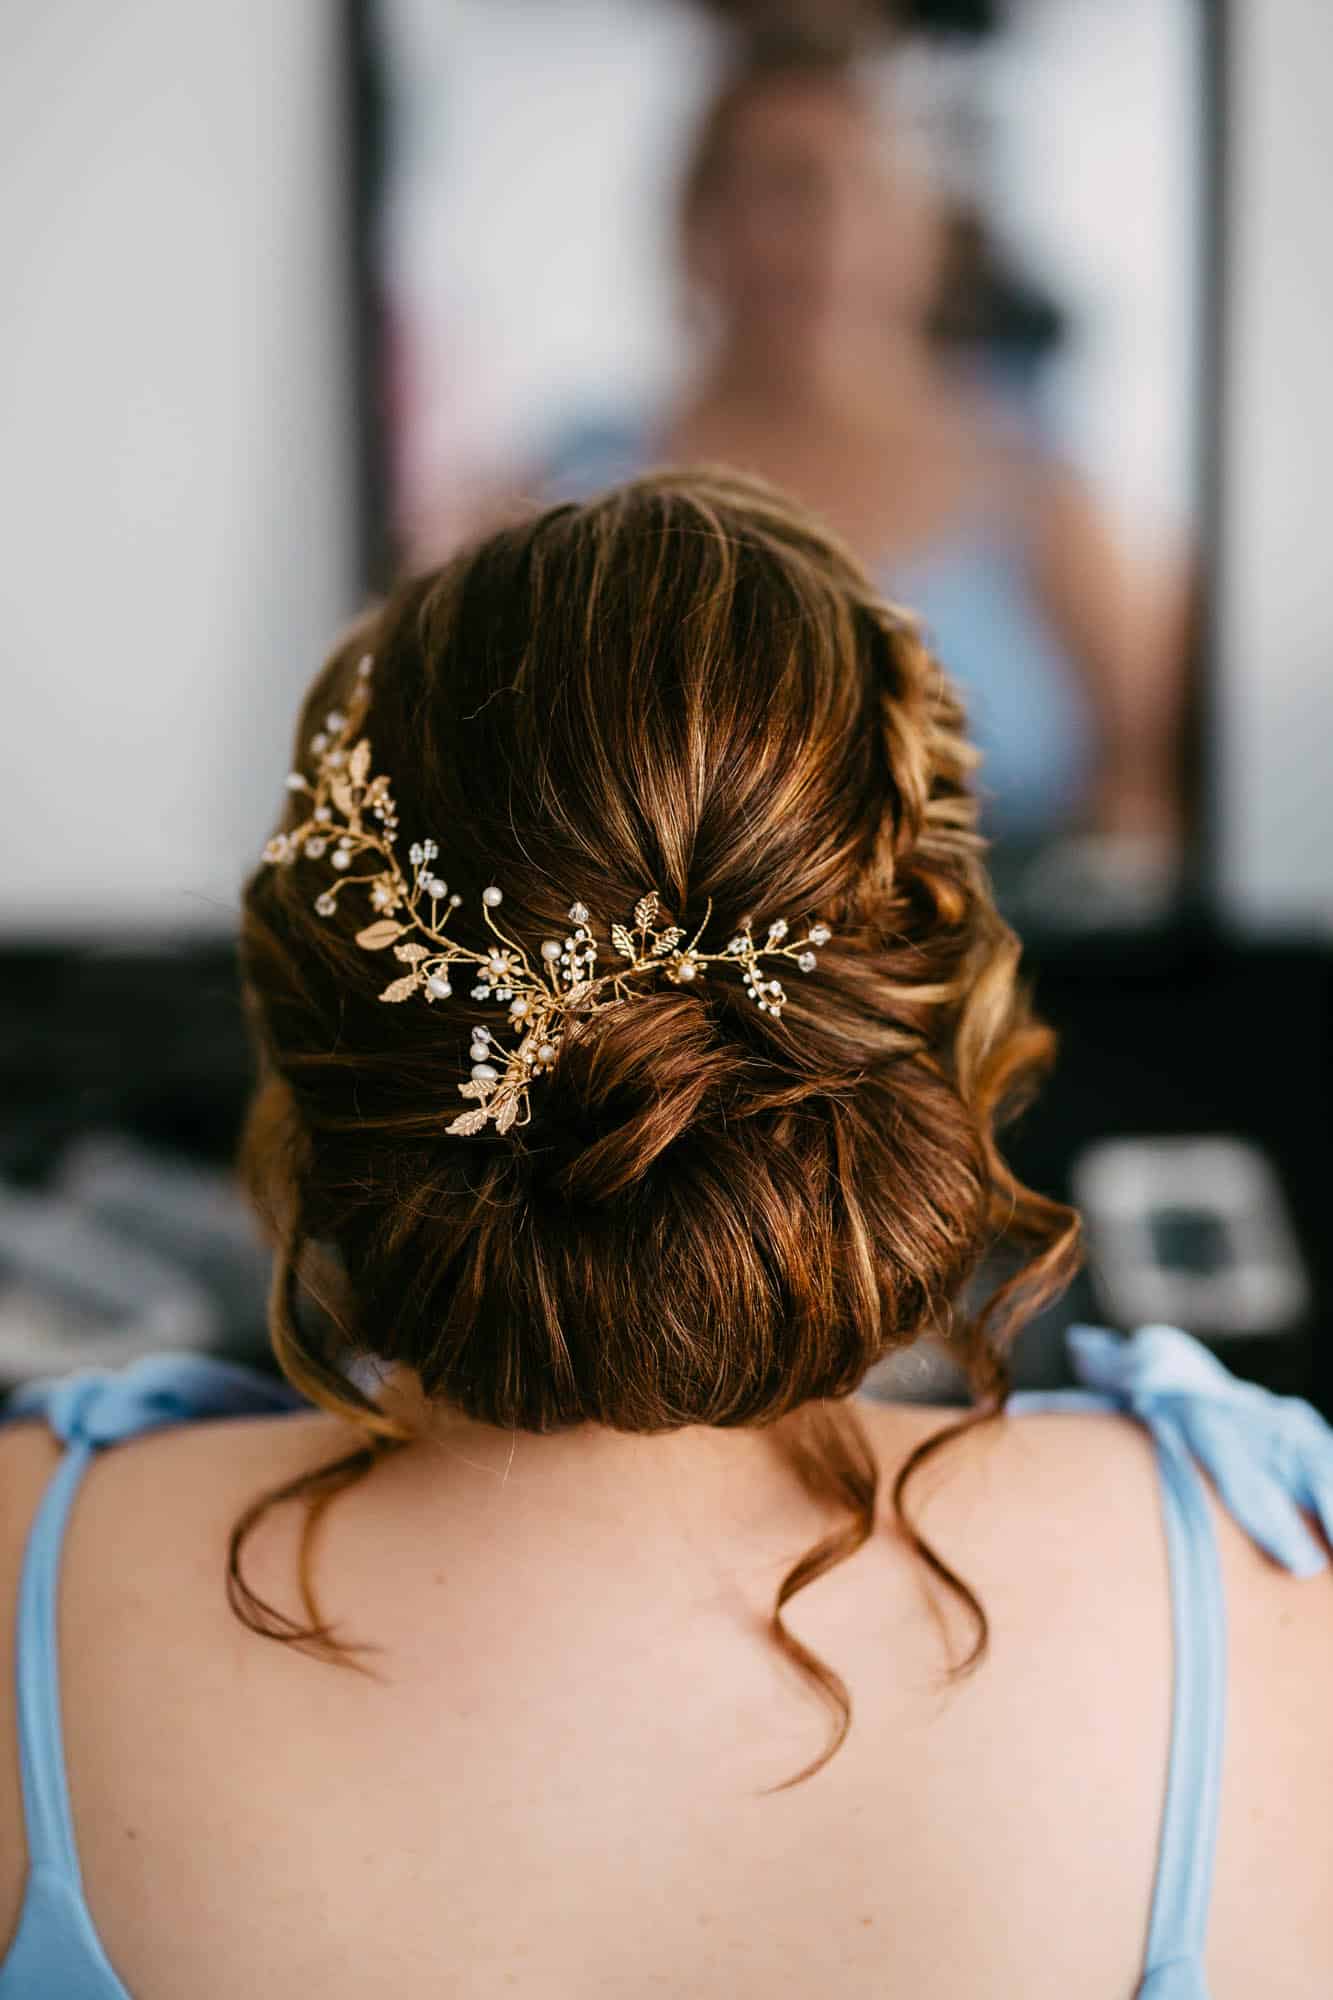     Description: The back of a bride's hair, decorated with a golden flower headpiece in her bridal hairstyles.